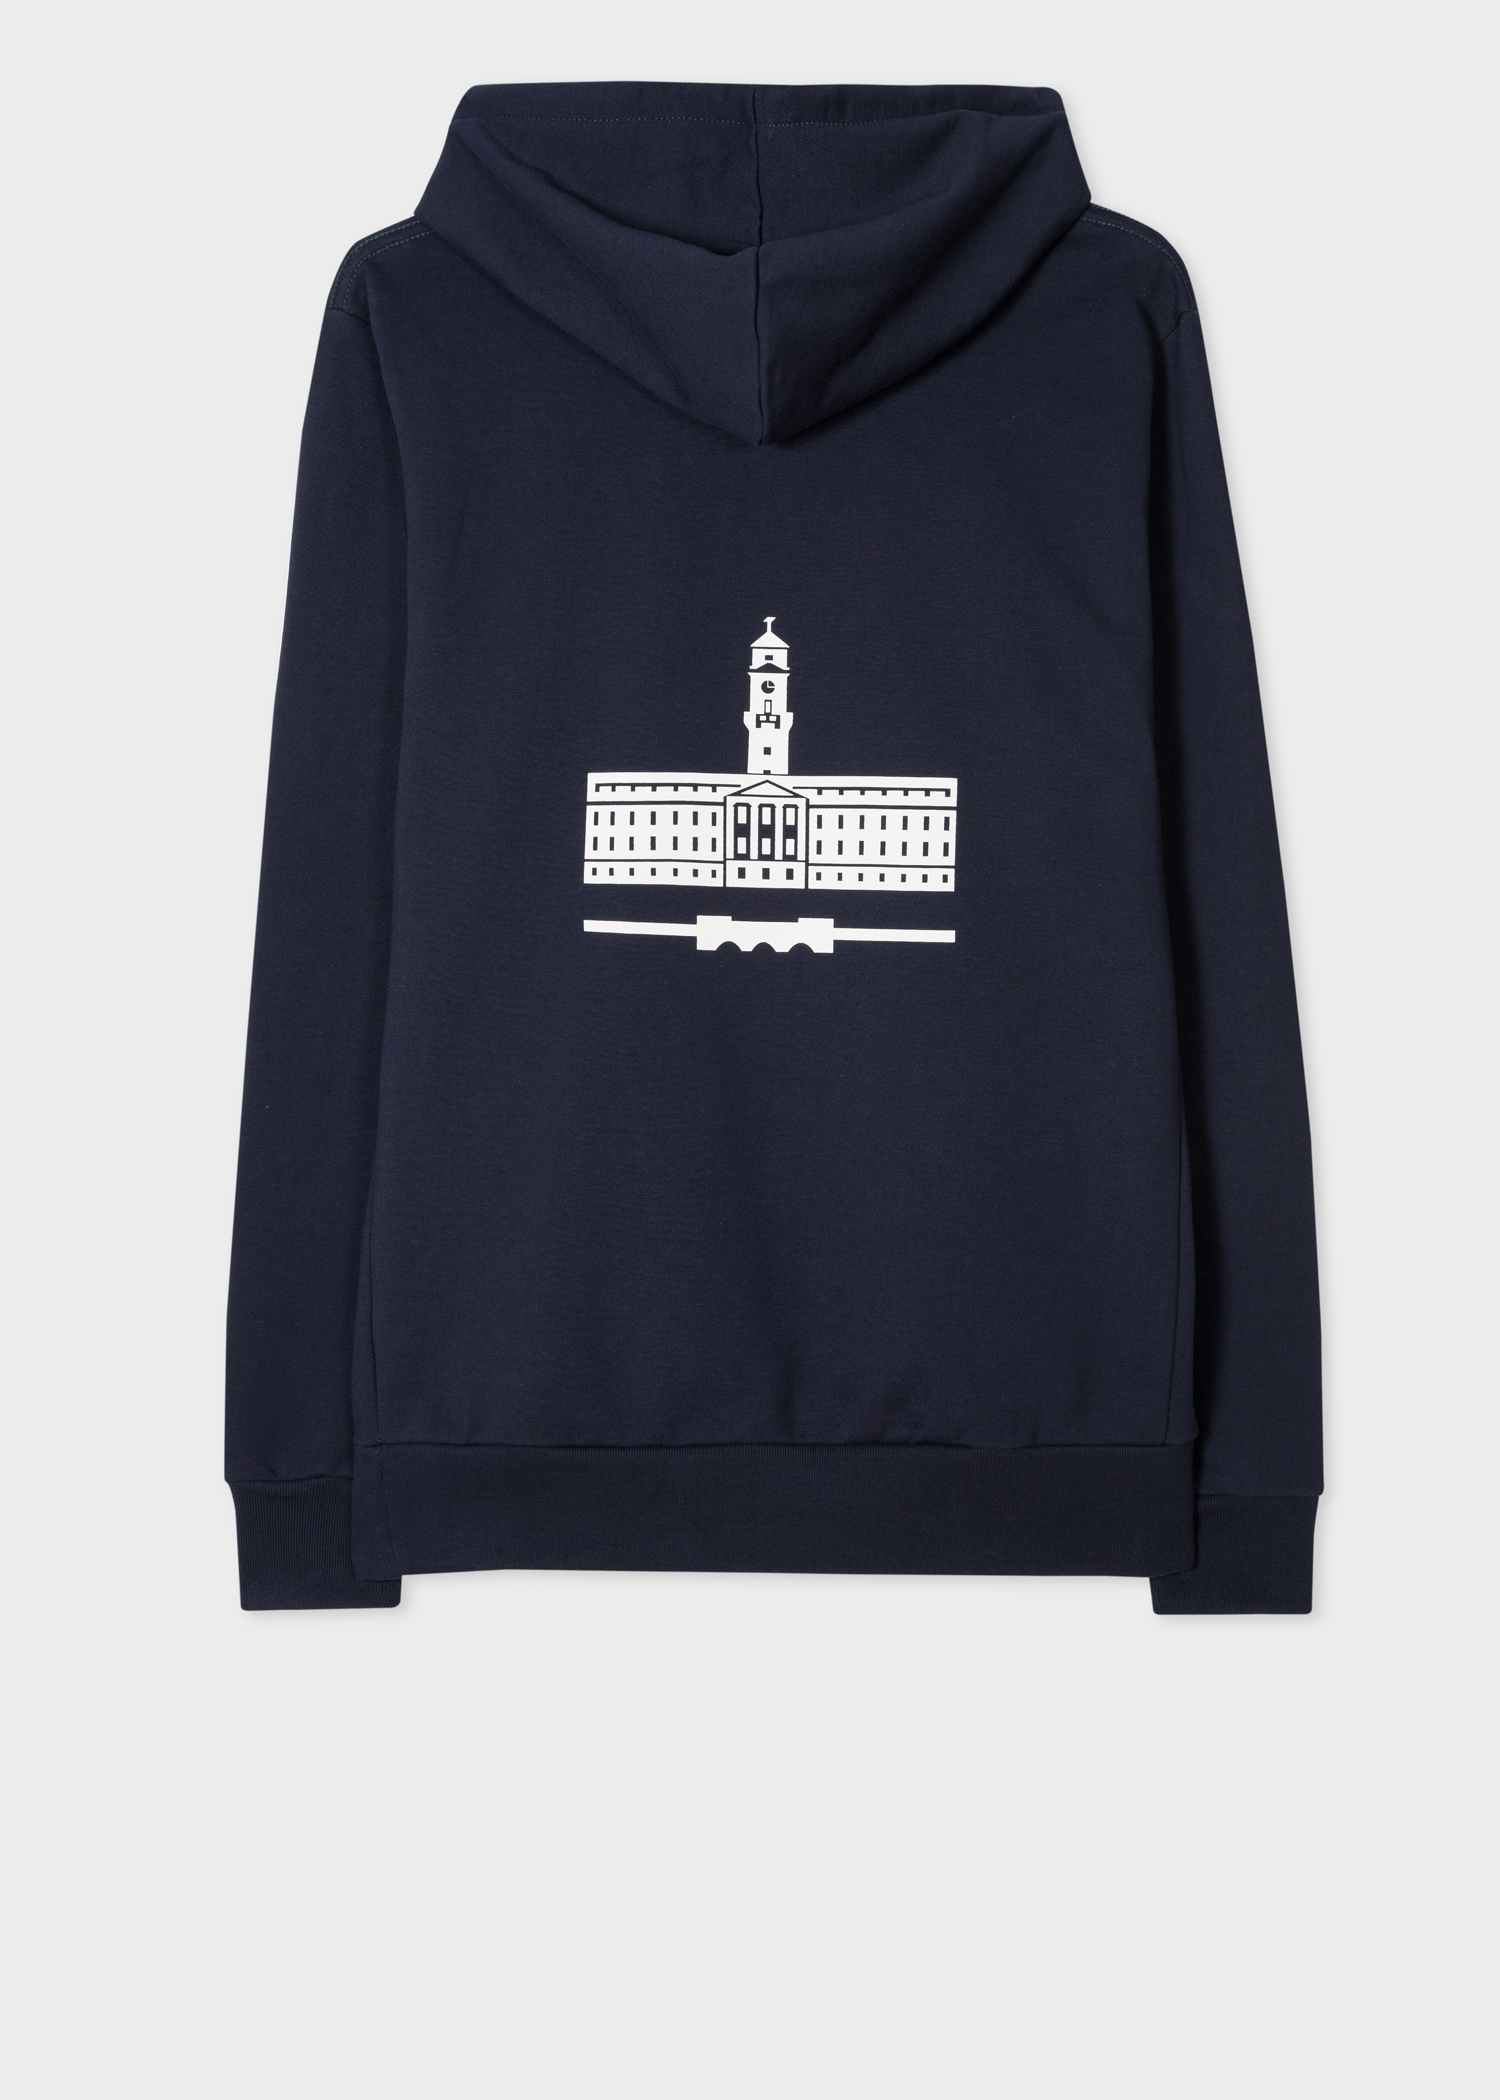 Back view - Paul Smith For University Of Nottingham - Navy 'Trent Building' Print Hoodie Paul Smith